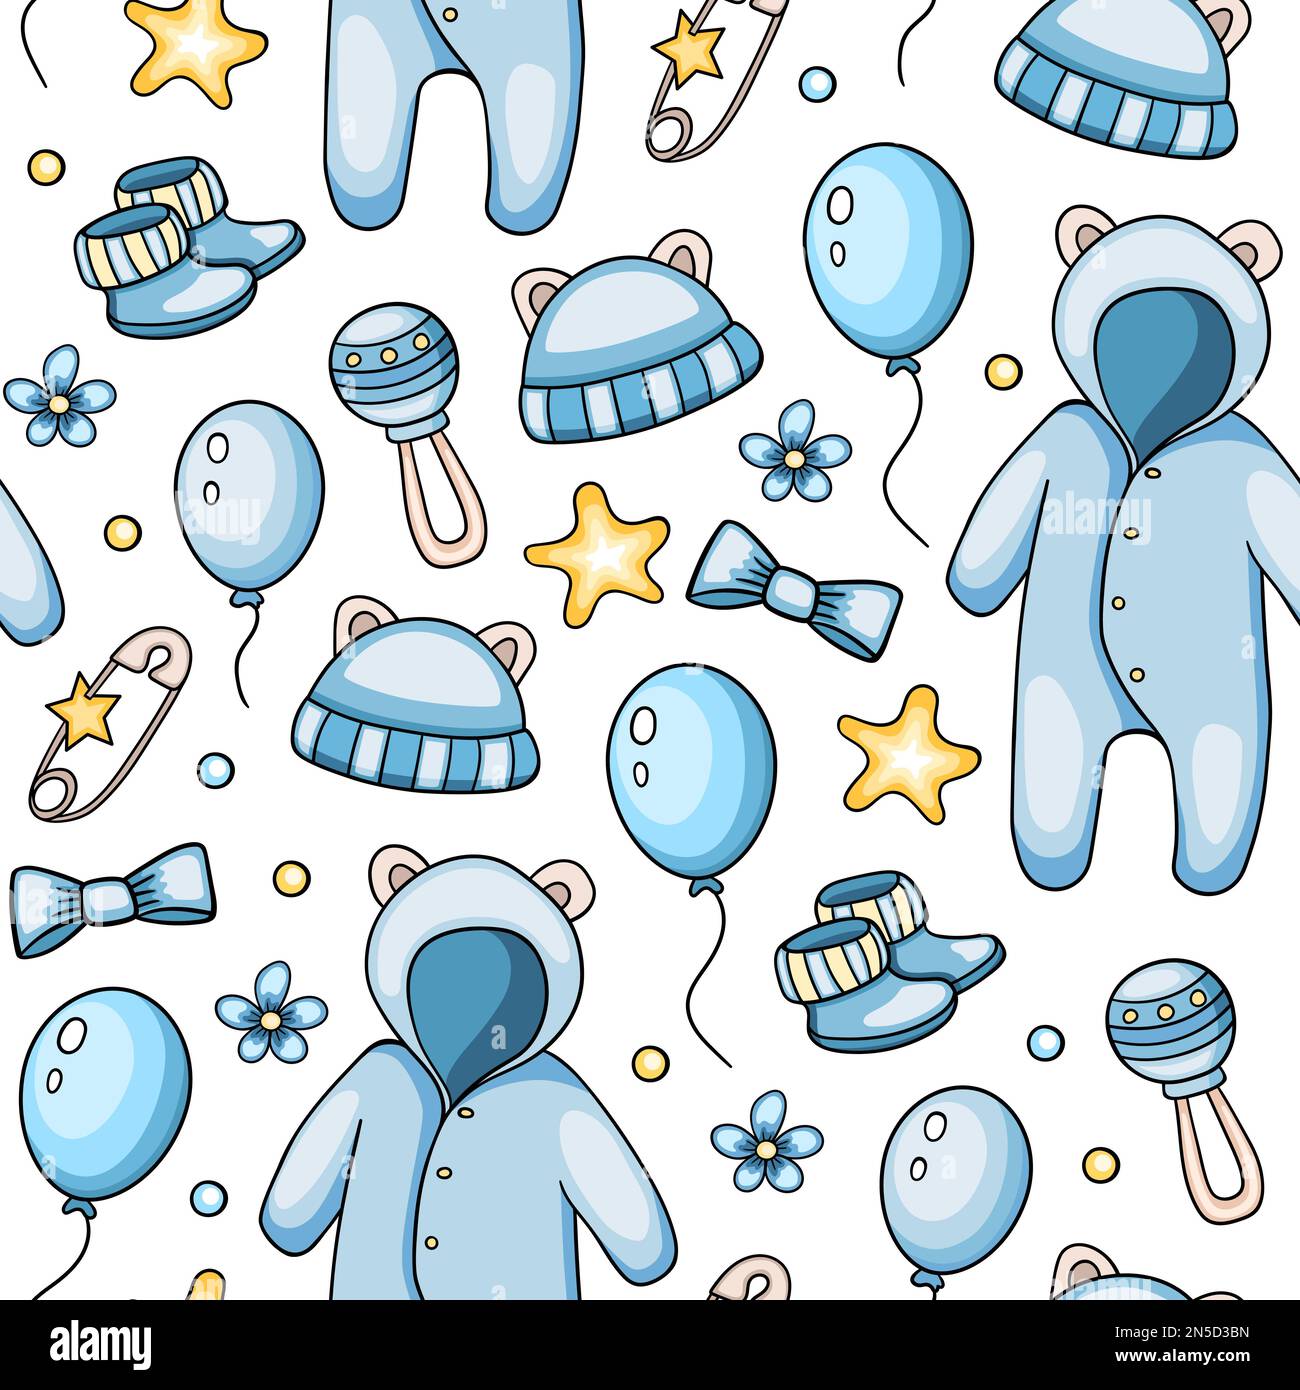 Seamless pattern with blue baby clothes and accessories for baby boy. Hand drawn background. Stock Photo